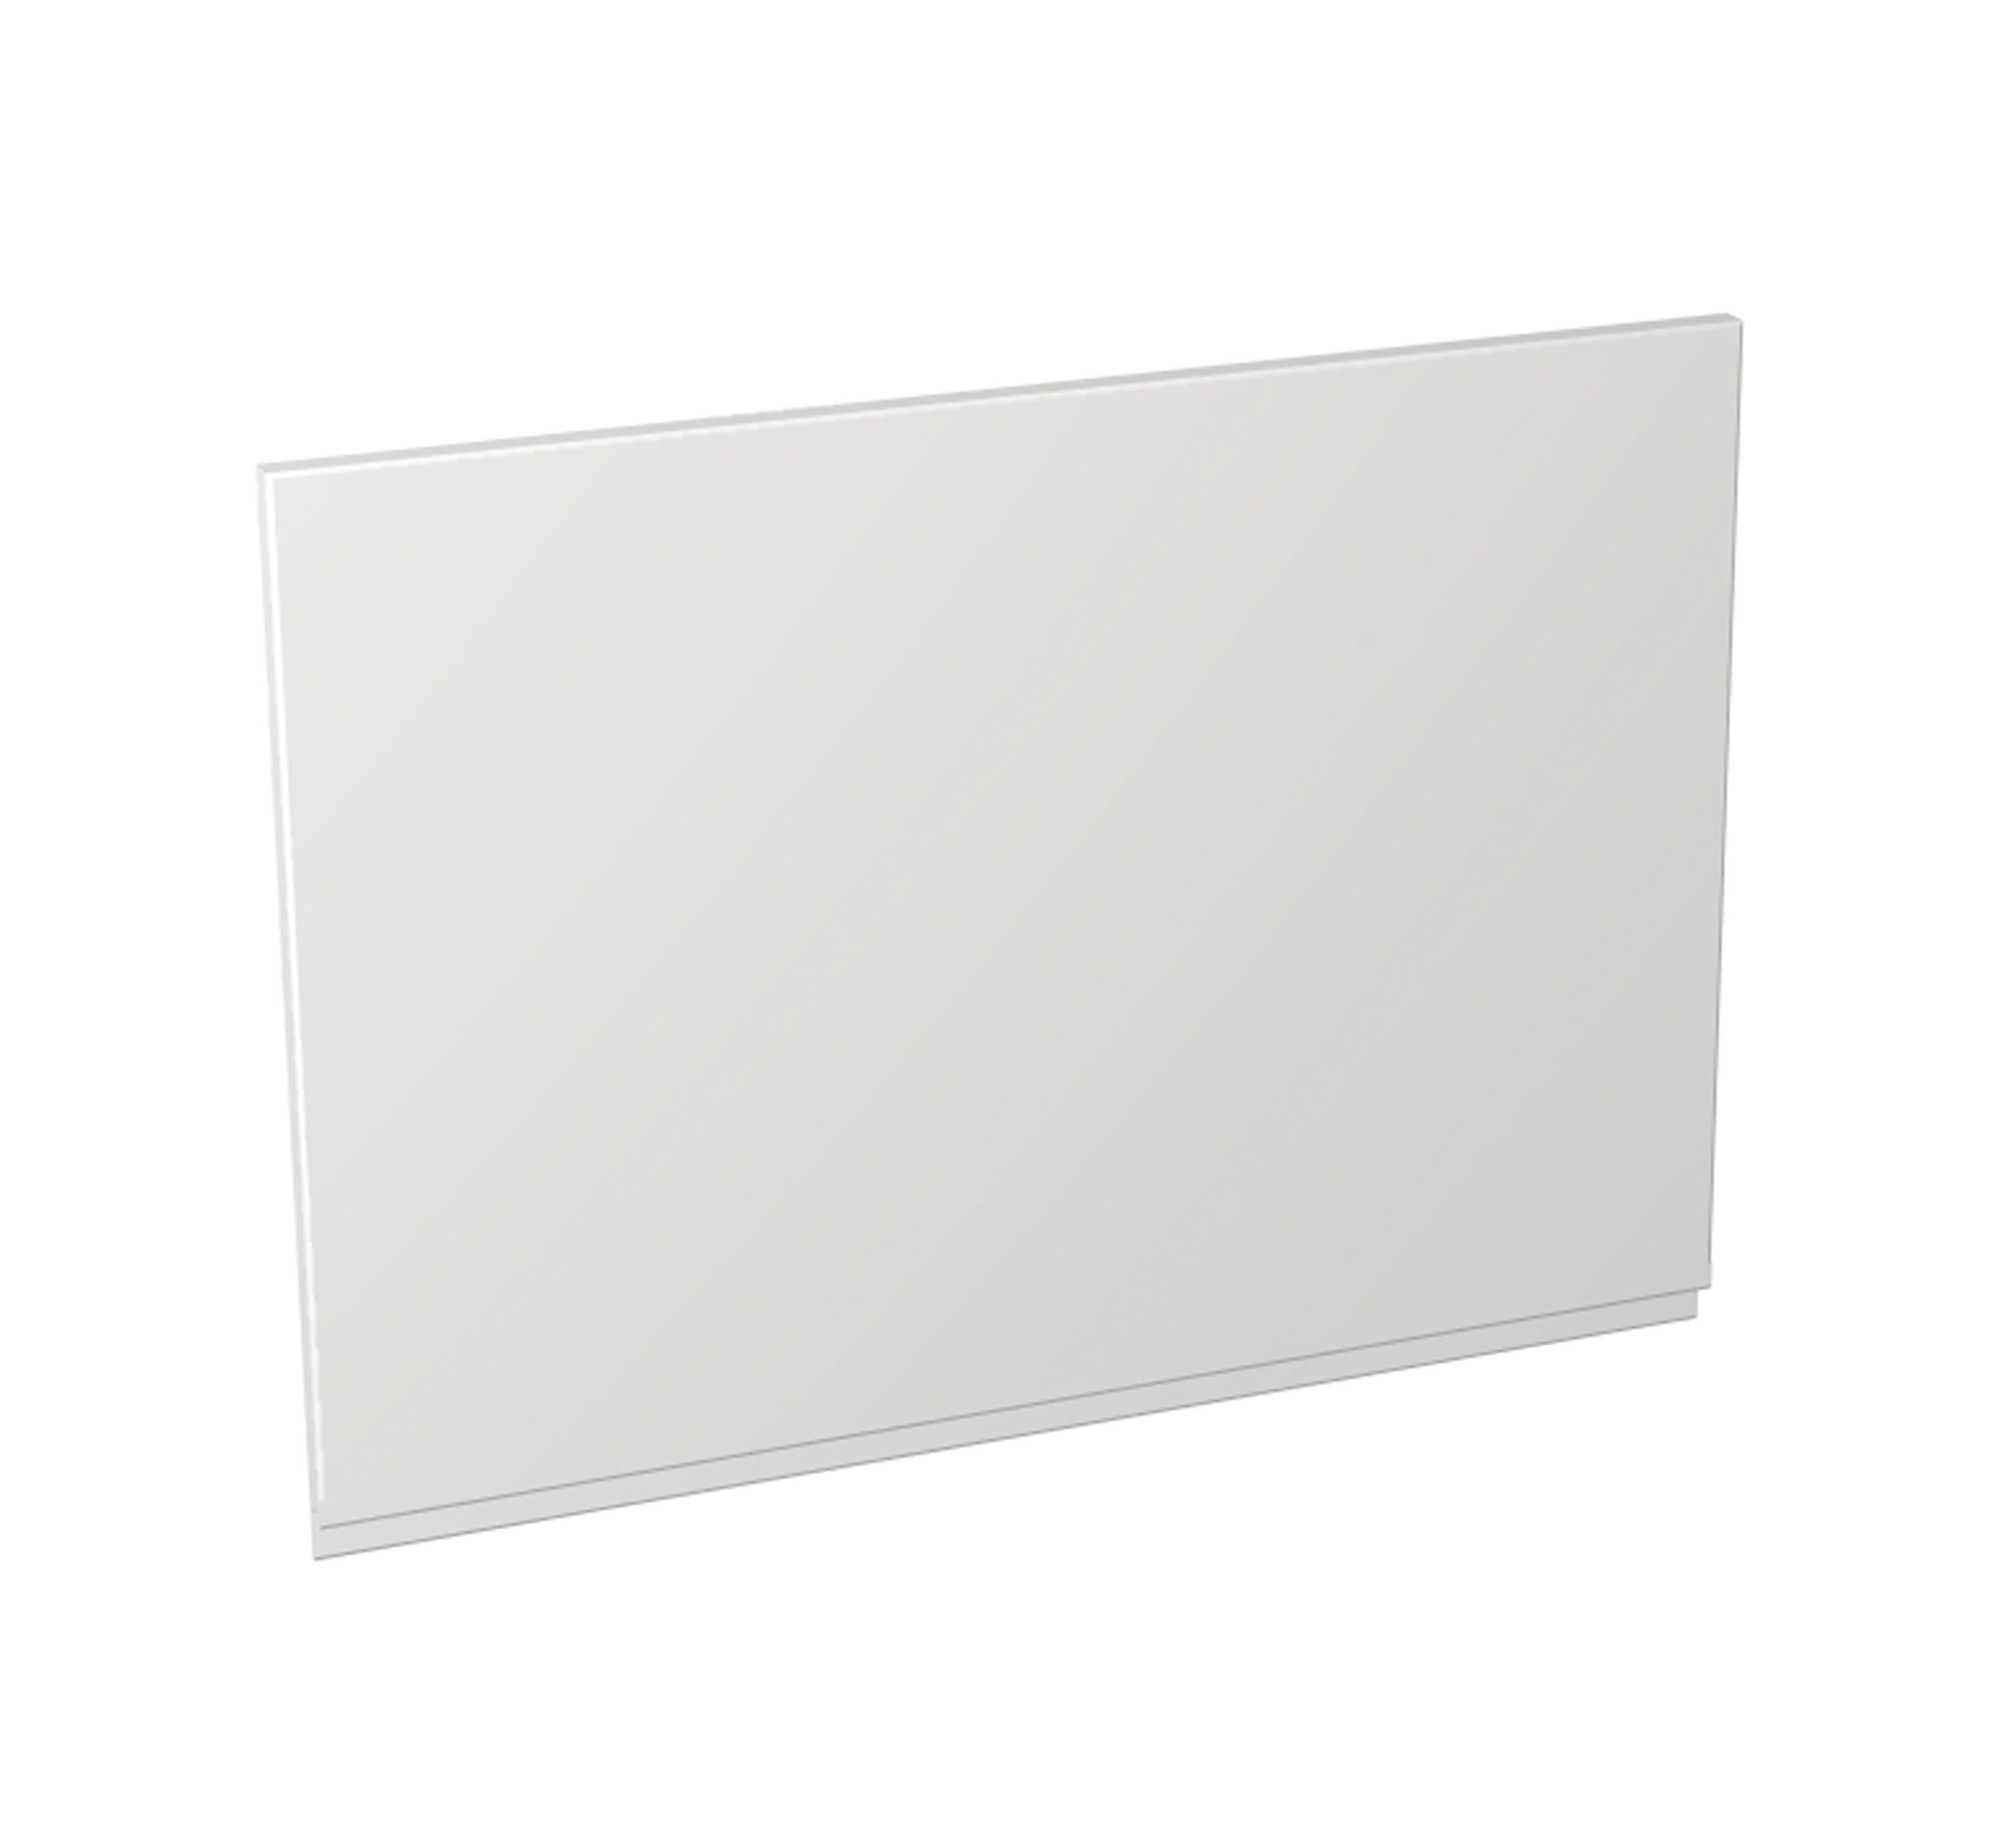 Image of Wickes Madison White Gloss Handleless Appliance Door (D) - 600 x 437mm